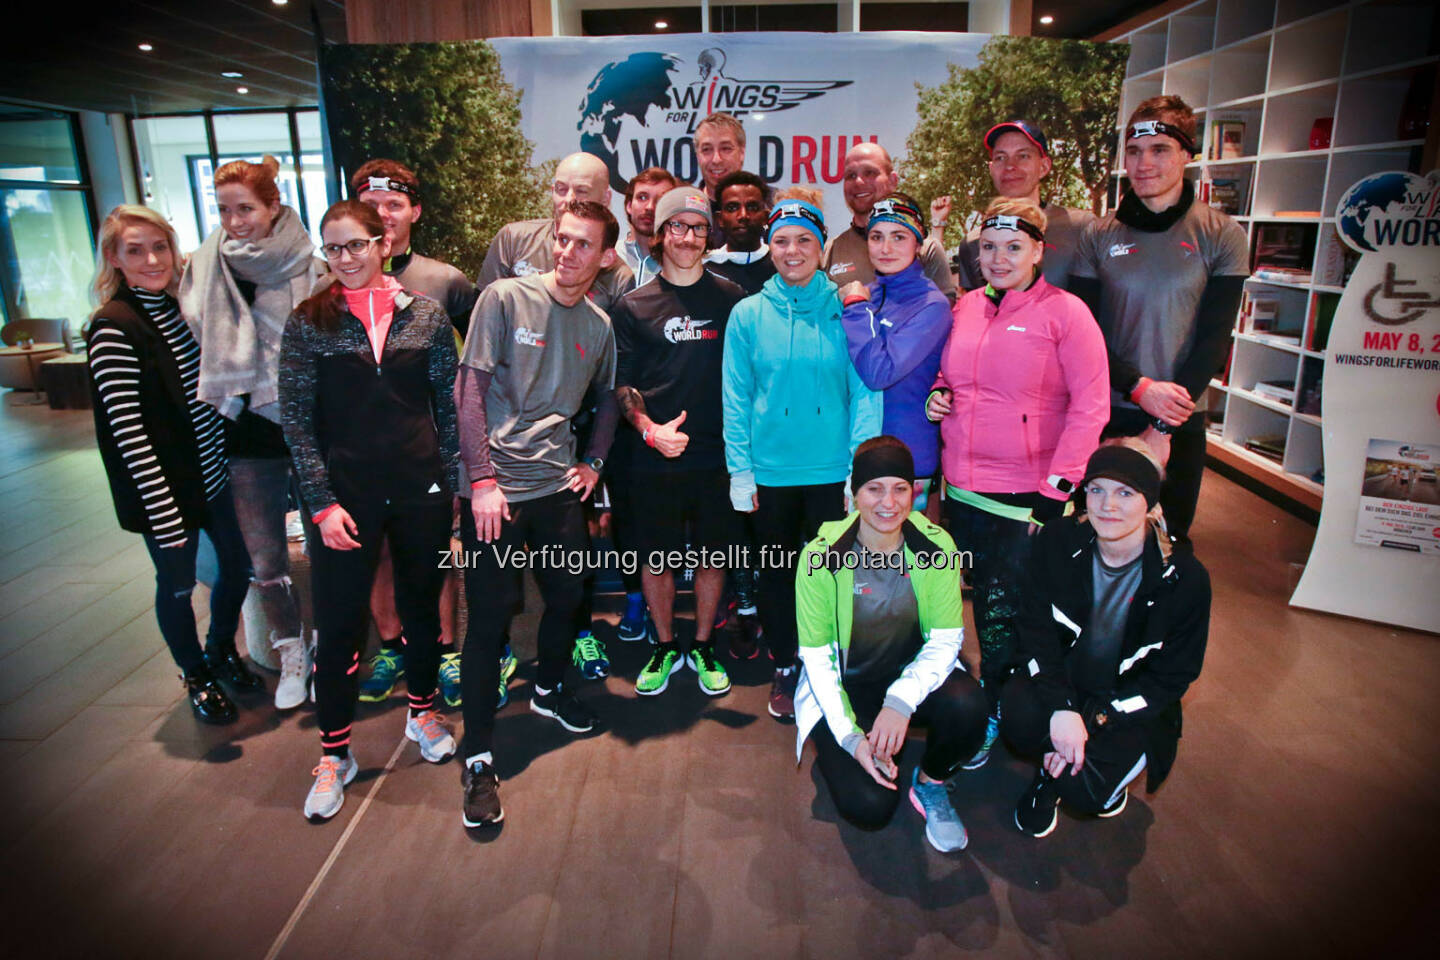 Florian Neuschwander and 
Lemawork Ketema ( middle) with participants at the Wings for Life World Run event in Munich 23rd of January 2016 (Bild: Daniel Grund)